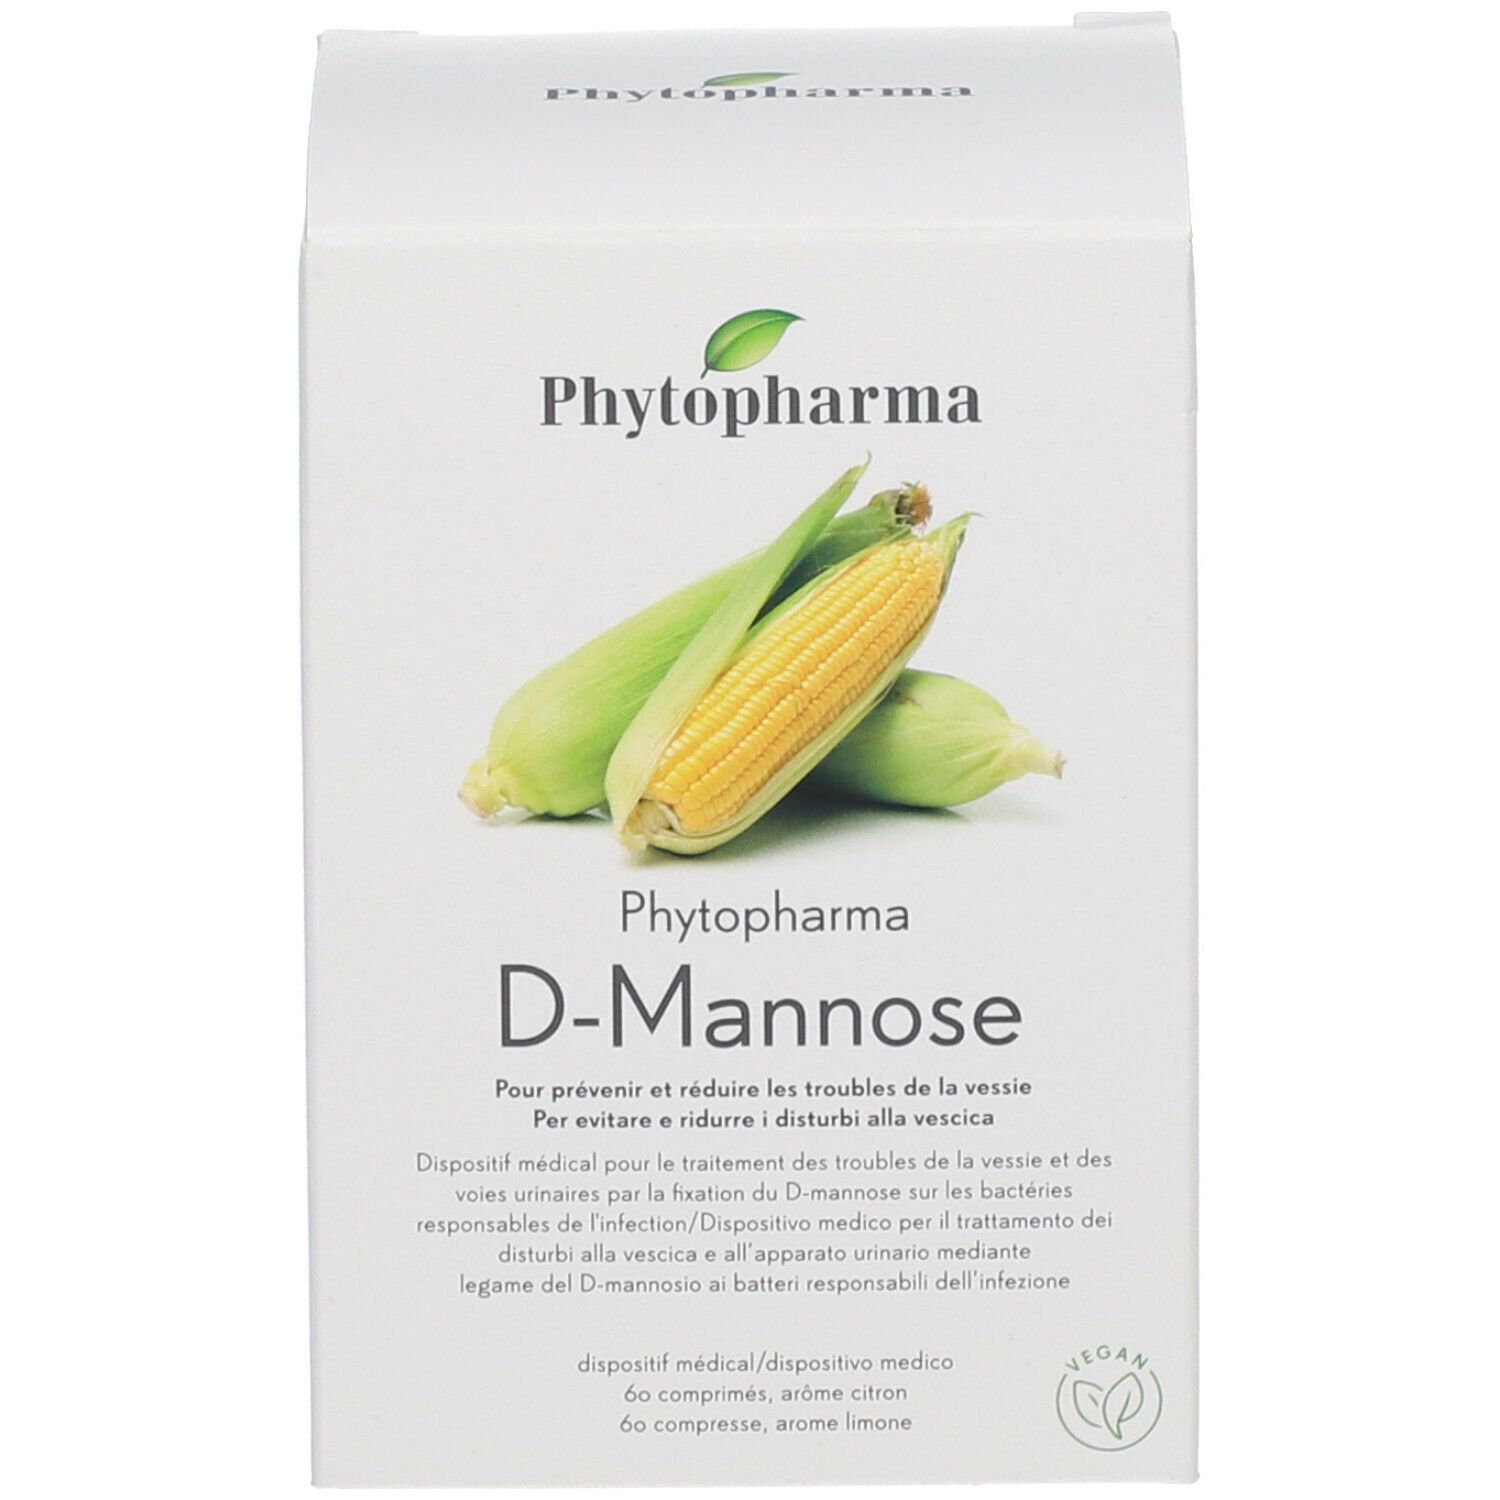 Phytopharma D-Mannose